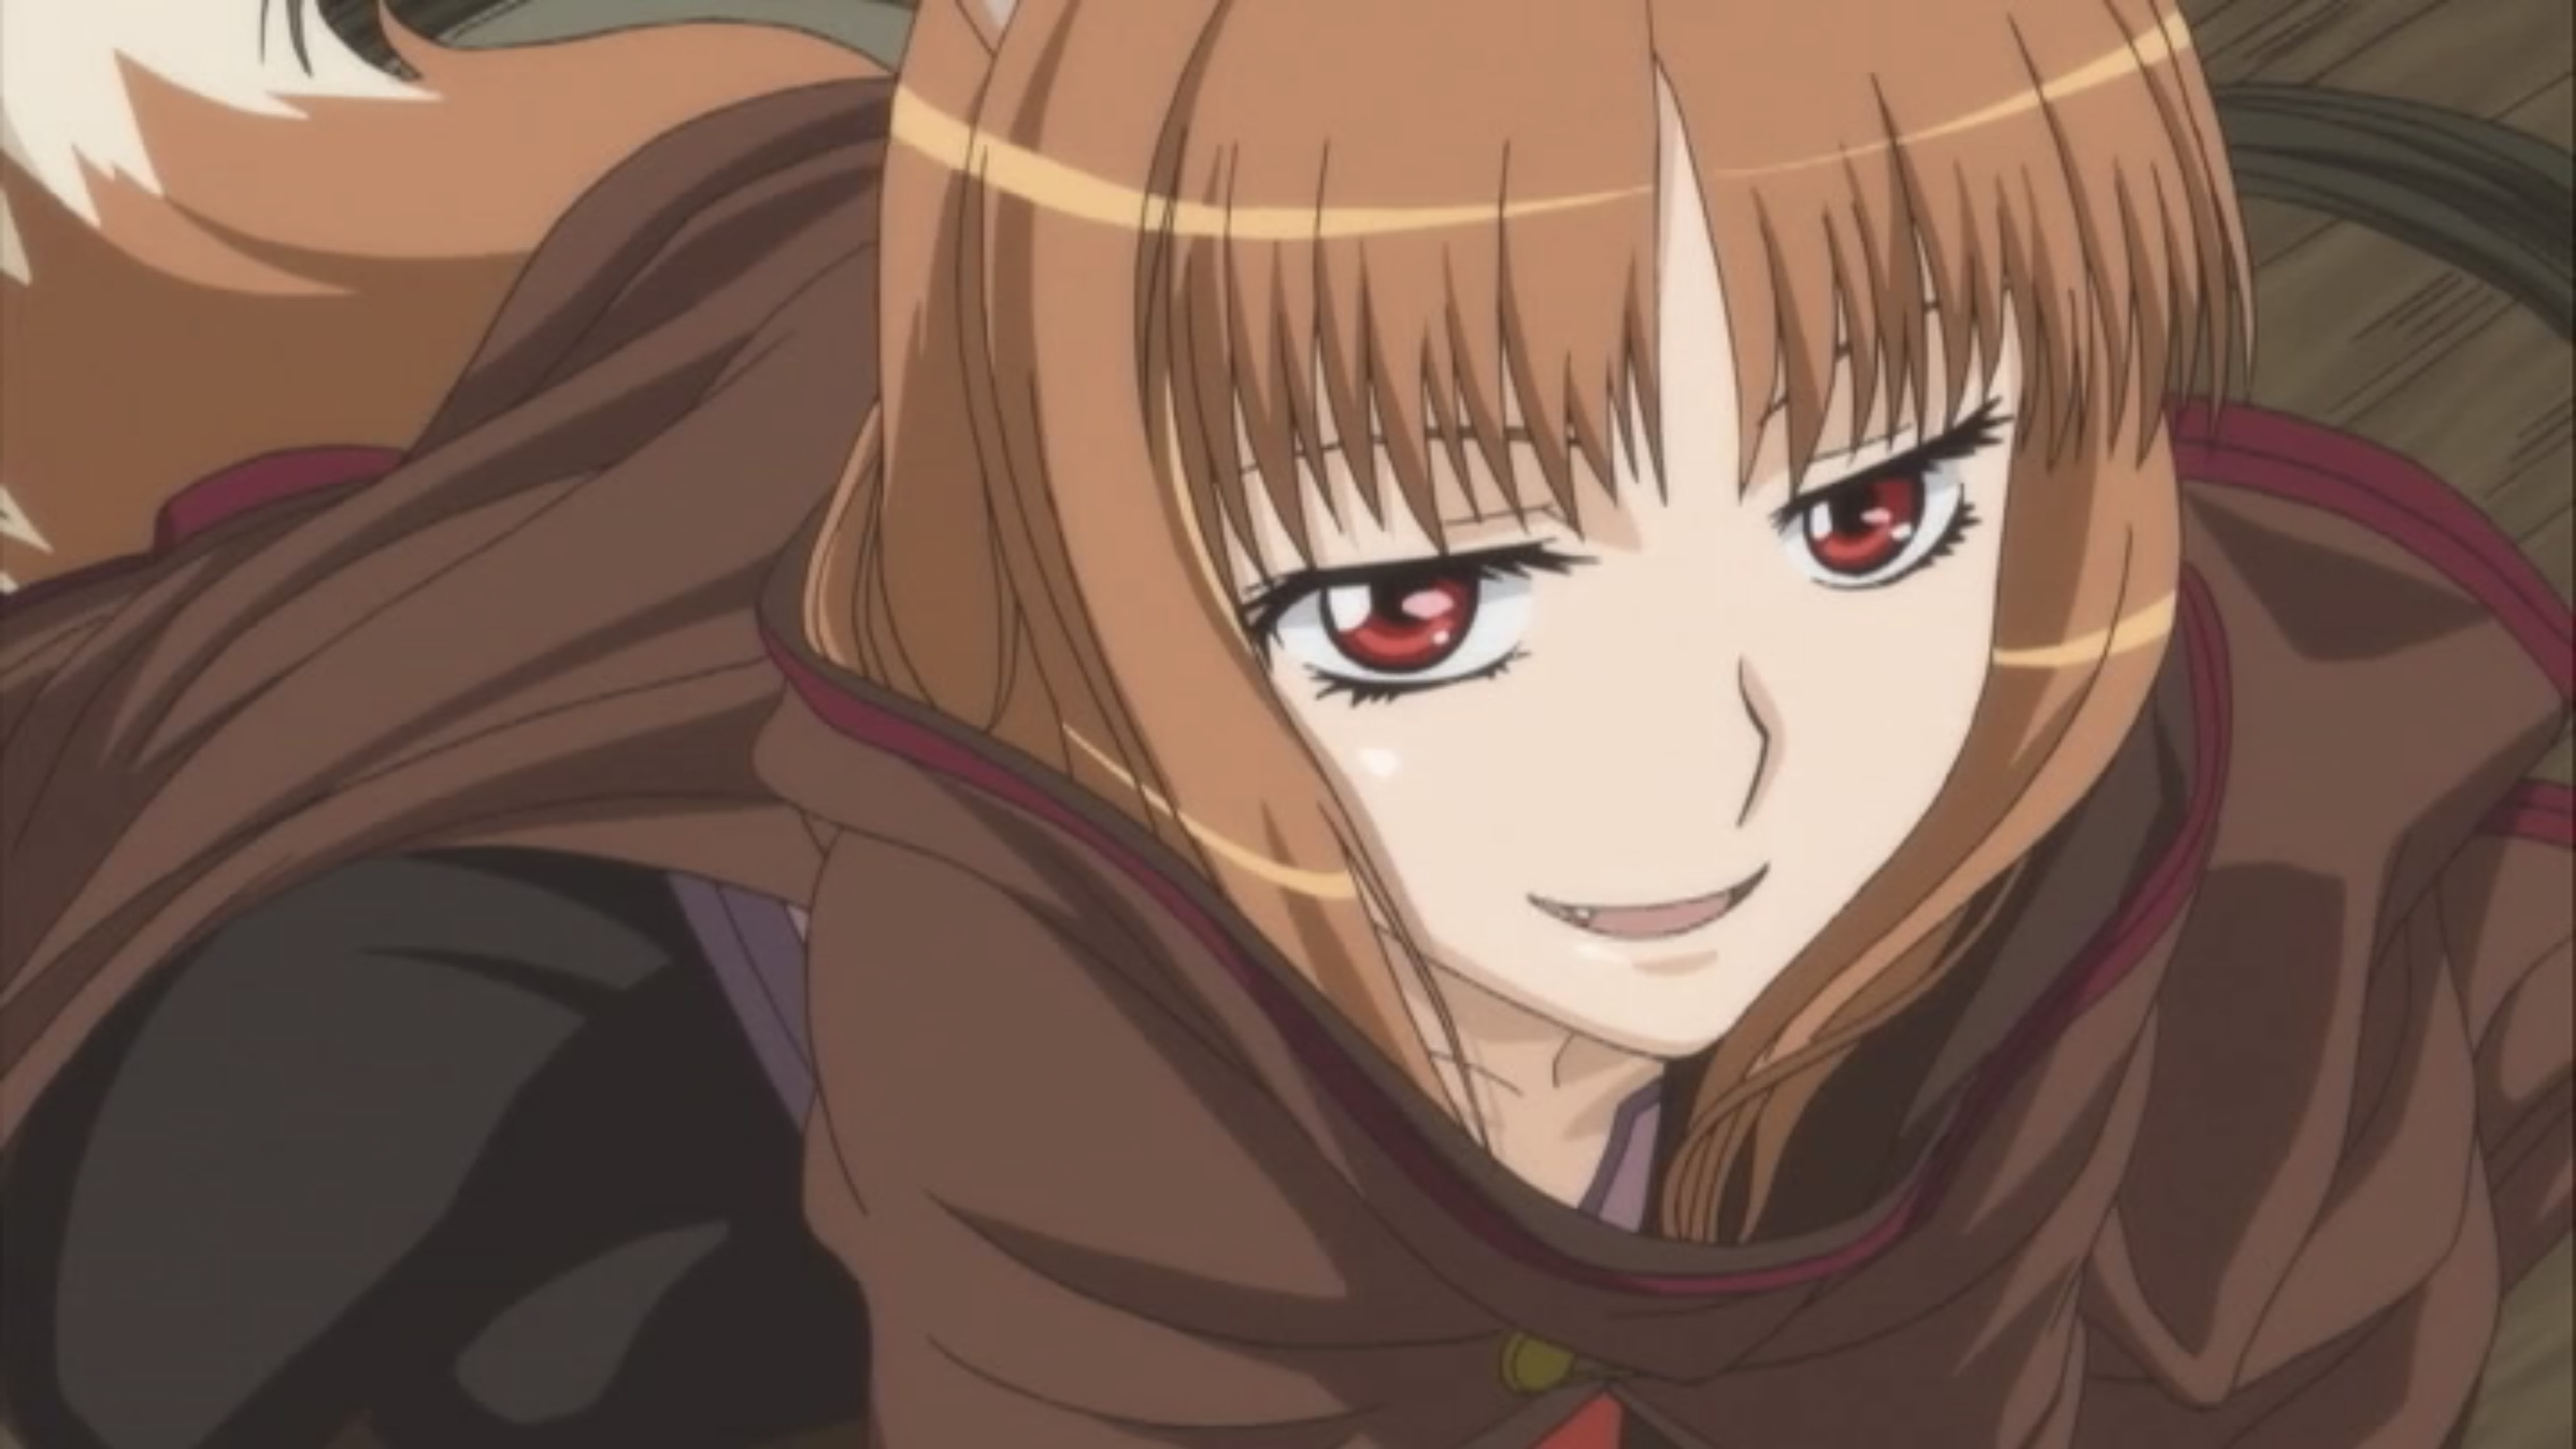 Crunchyroll - Spice and Wolf Gets 3rd Anime Project